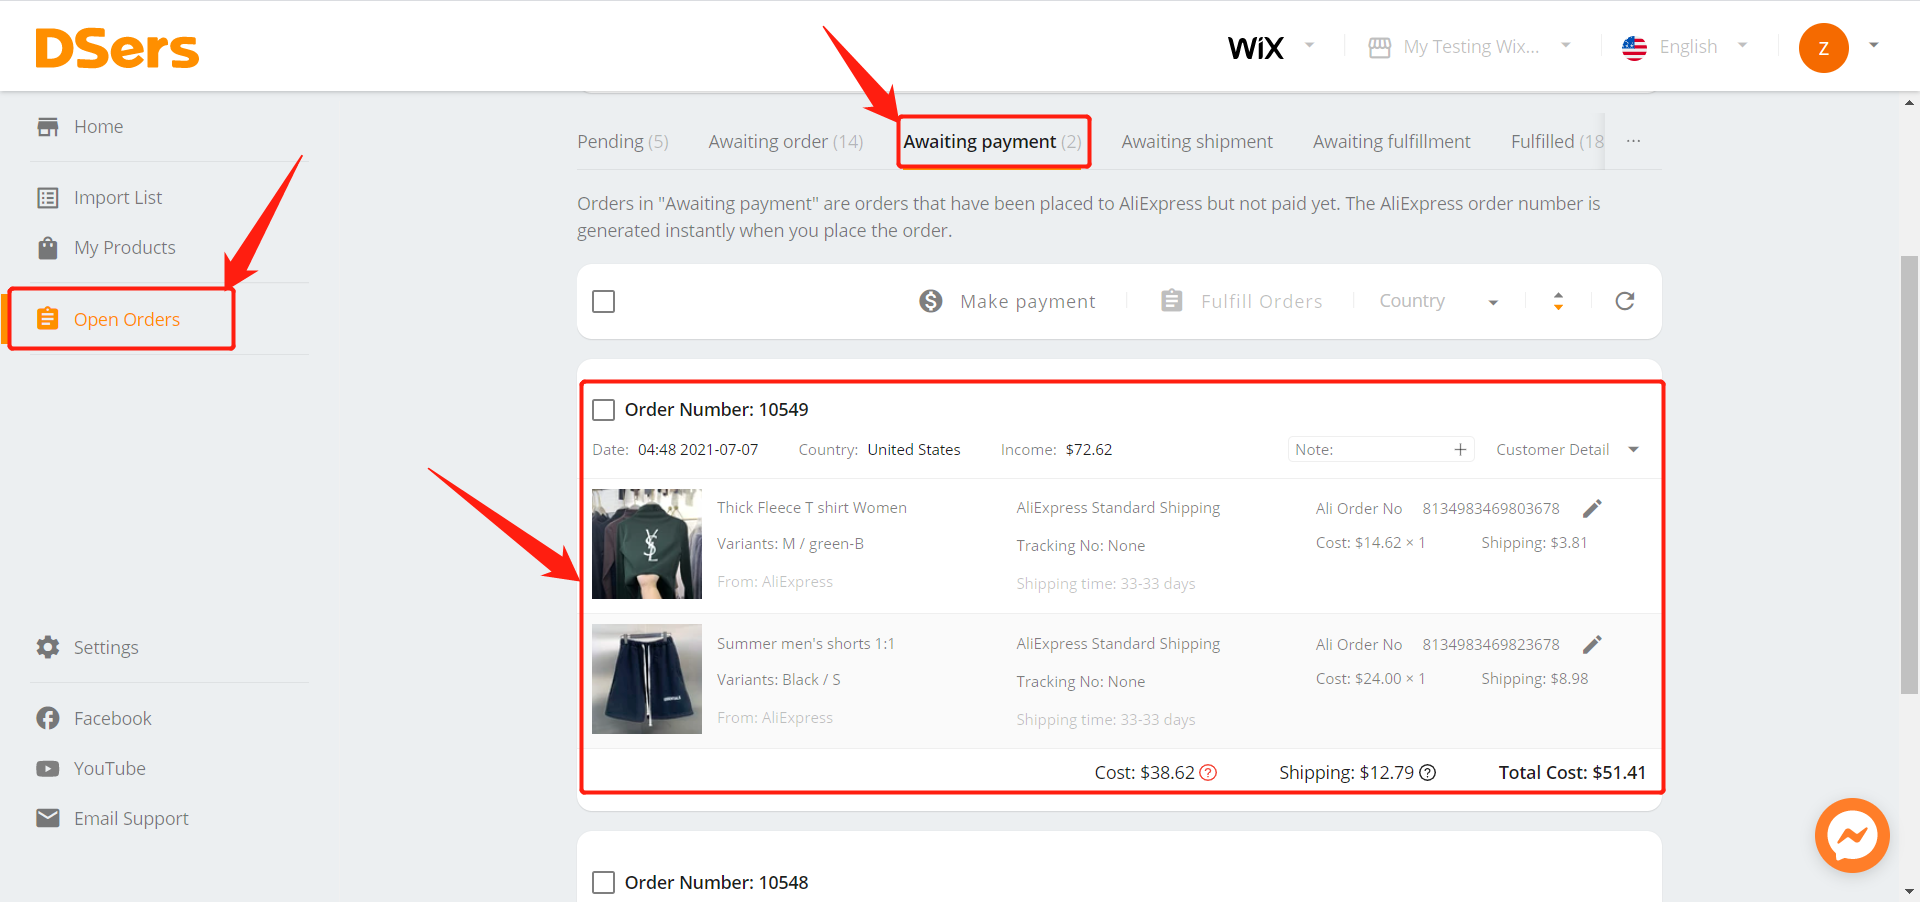 DSers Awaiting Fulfillment - DSers – Open Orders – Awaiting payment - Wix DSers